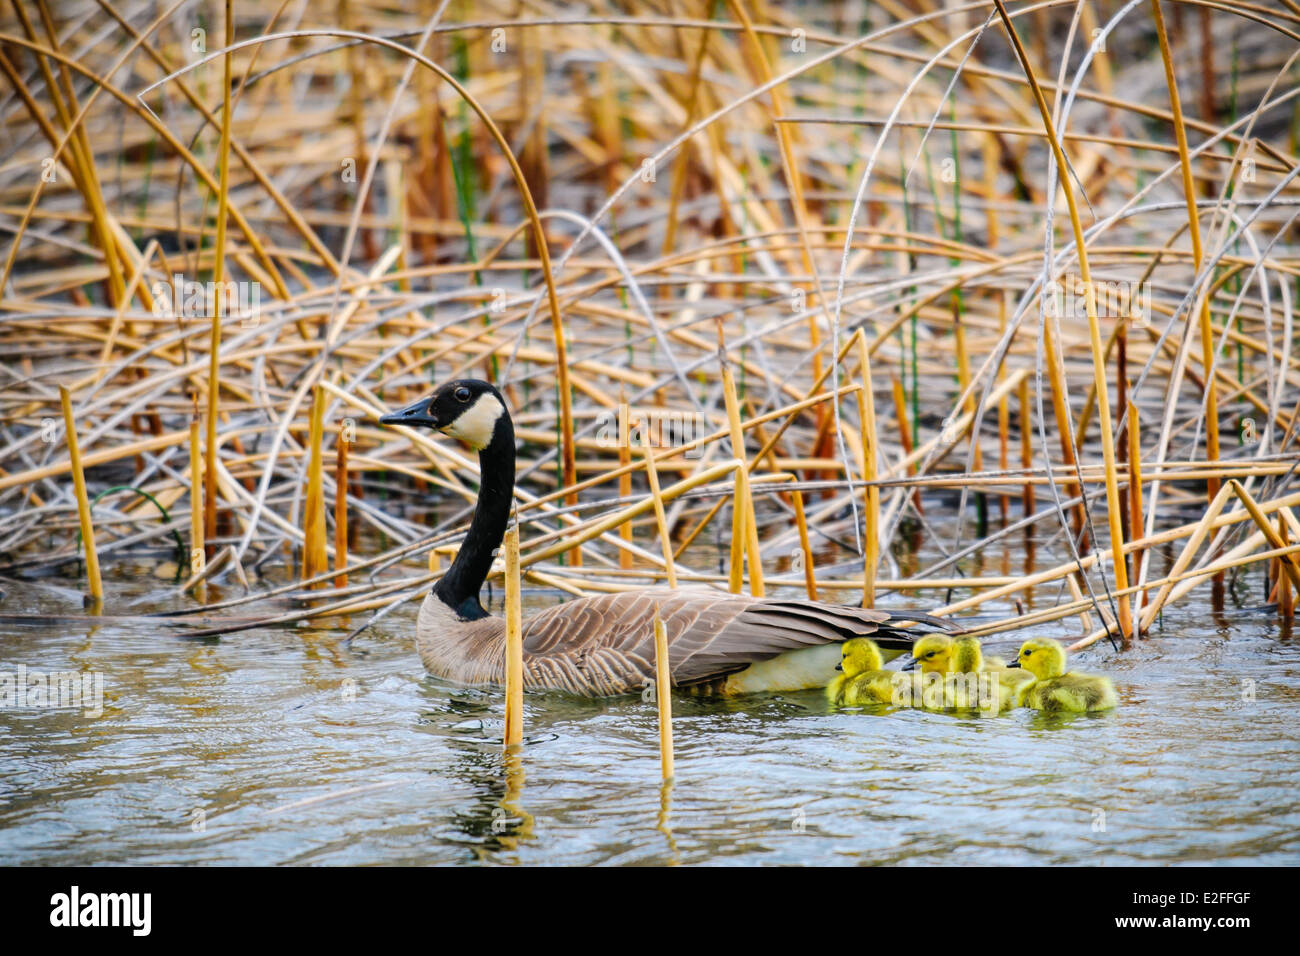 Canada Goose with a brood of yellow baby gosling Stock Photo